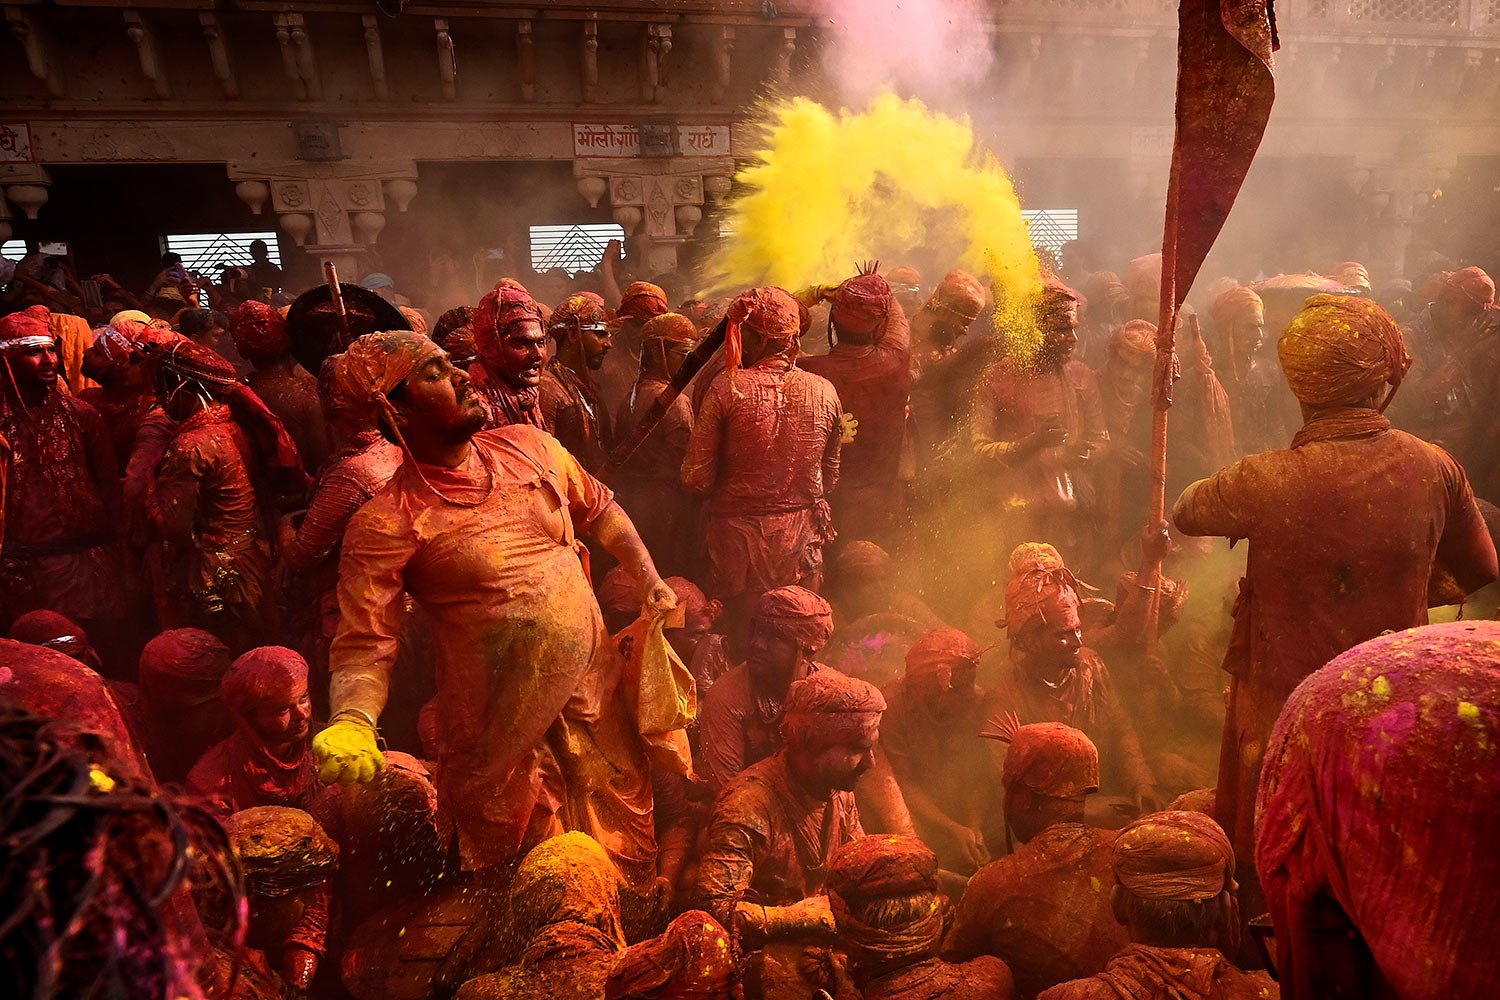  Men from Barsana village smeared with colors play Holi at Nandagram temple in Nandgoan village, 115 kilometers (70 miles) south of New Delhi, India, Wednesday, March 1, 2023.  (AP Photo/Deepanshu Aggarwal) 